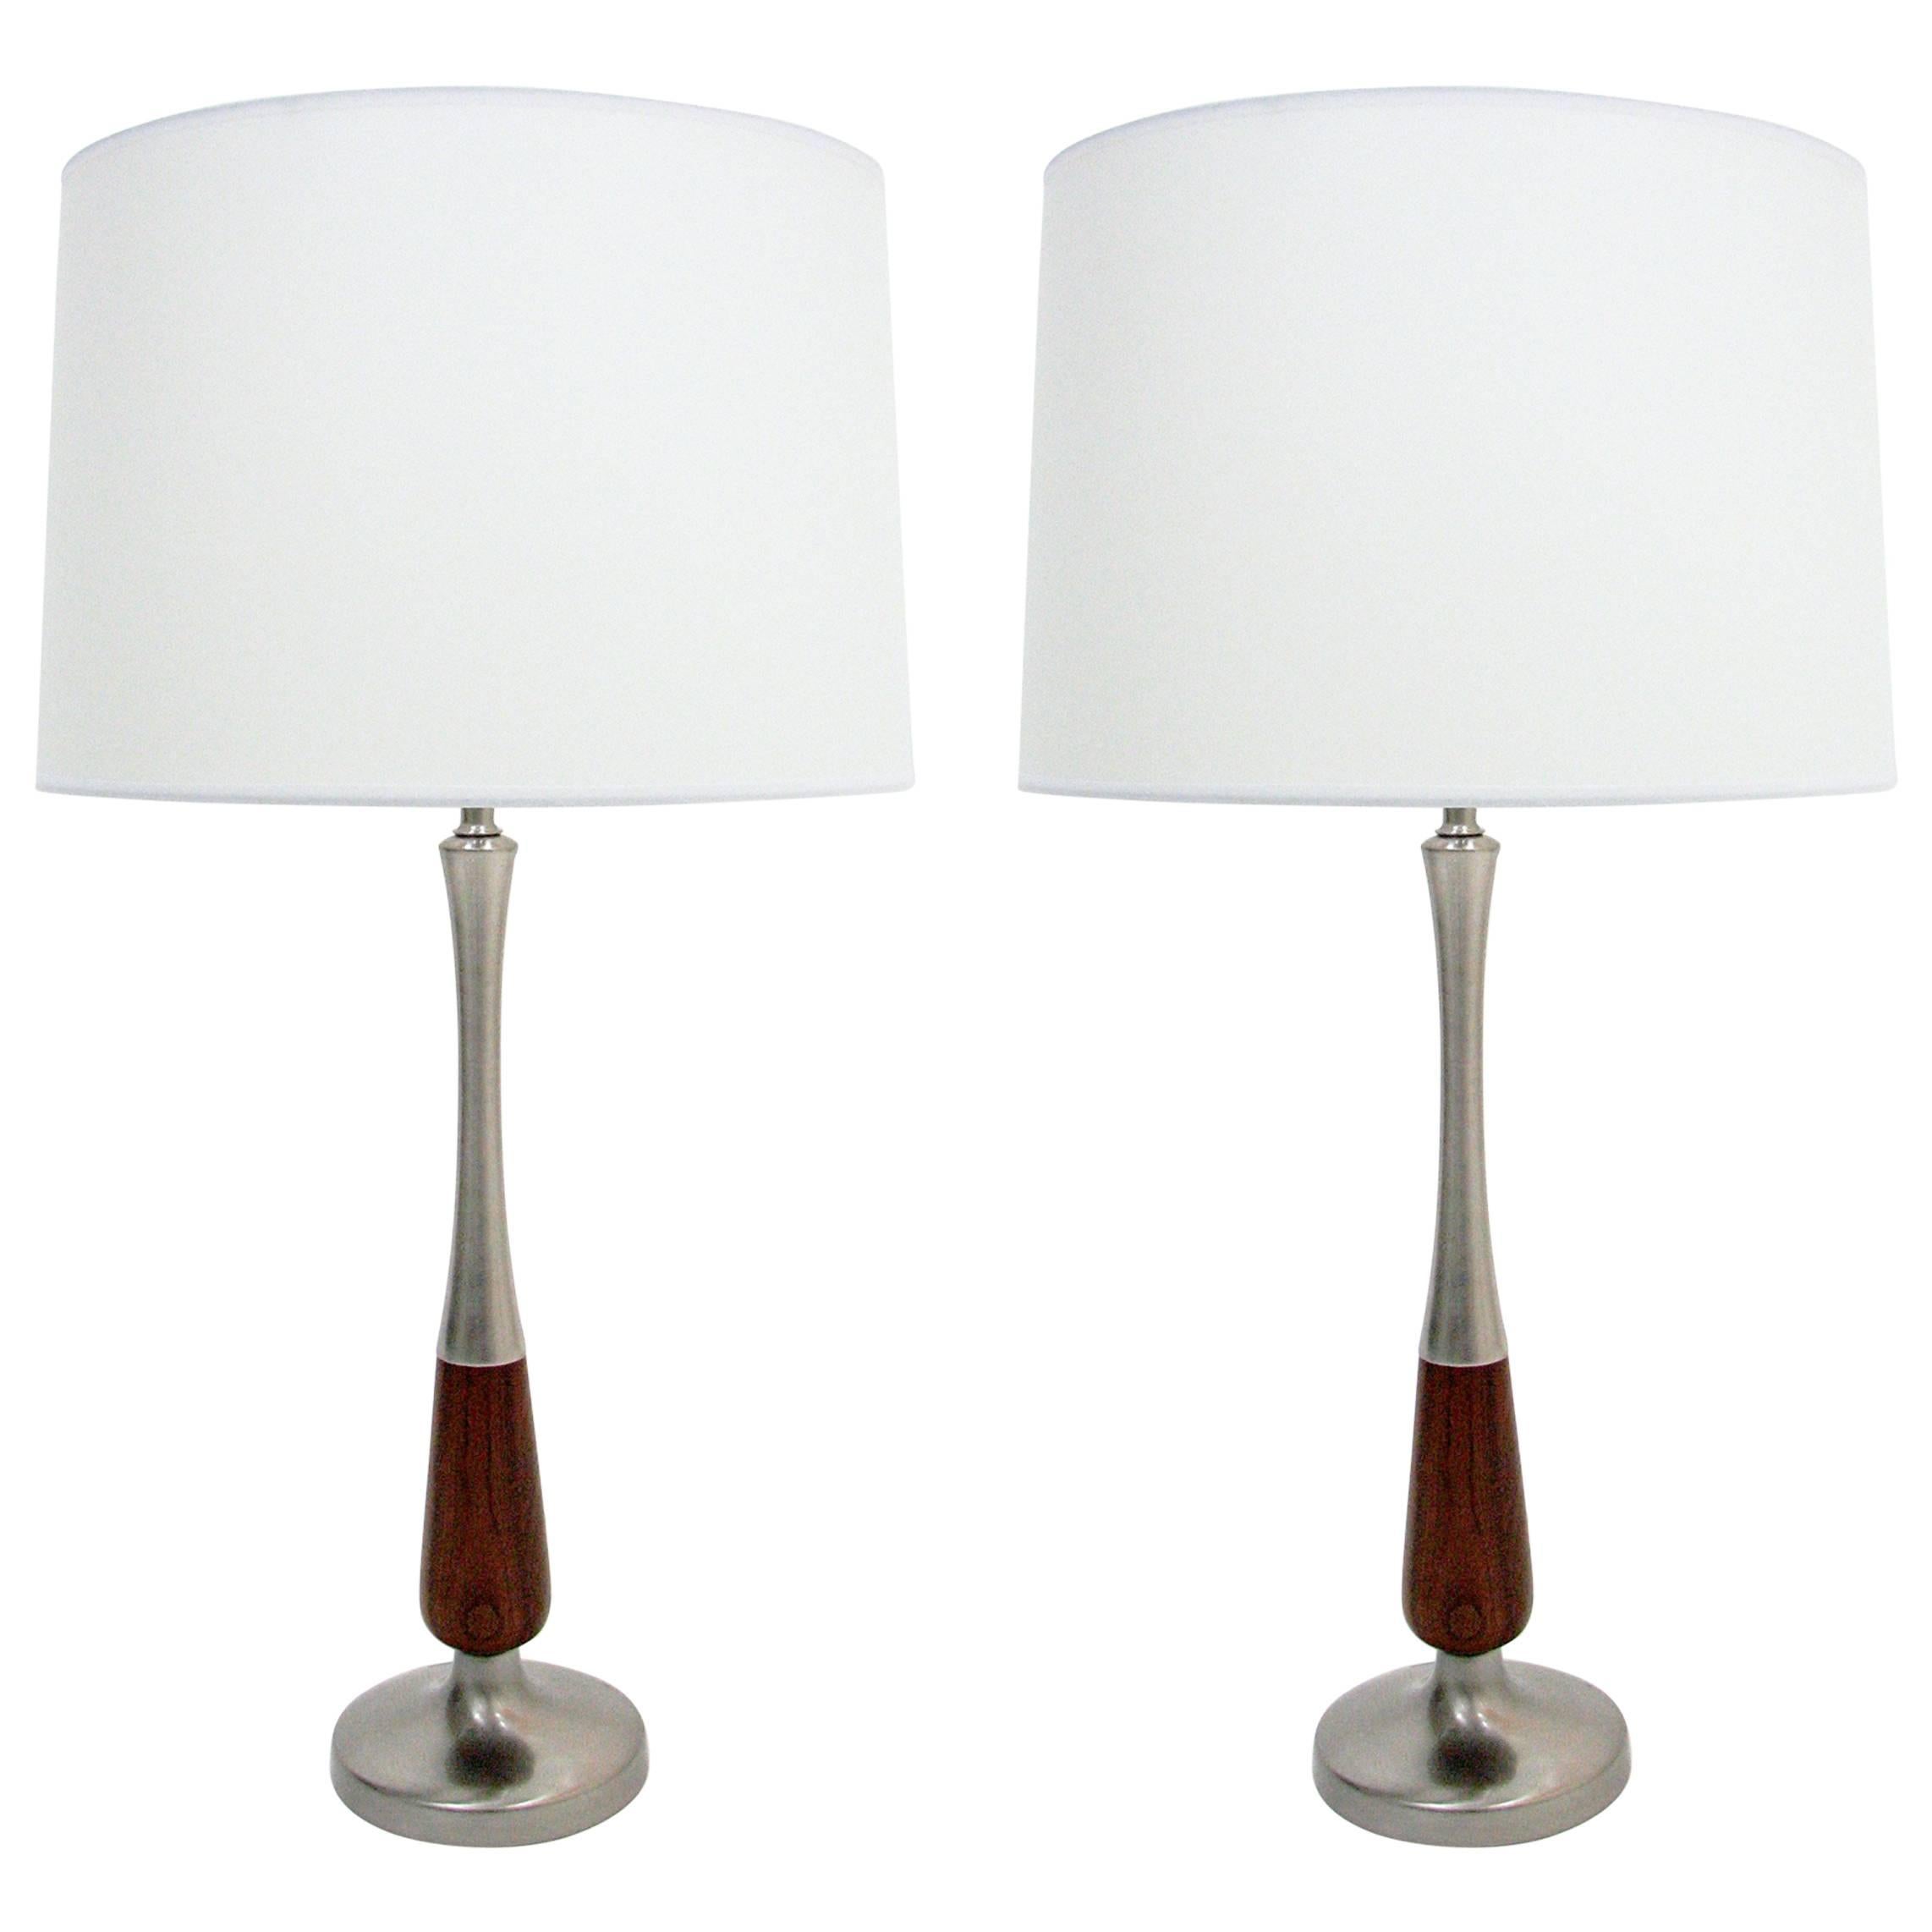 Pair of Midcentury Walnut and Brushed Nickel Lamps For Sale